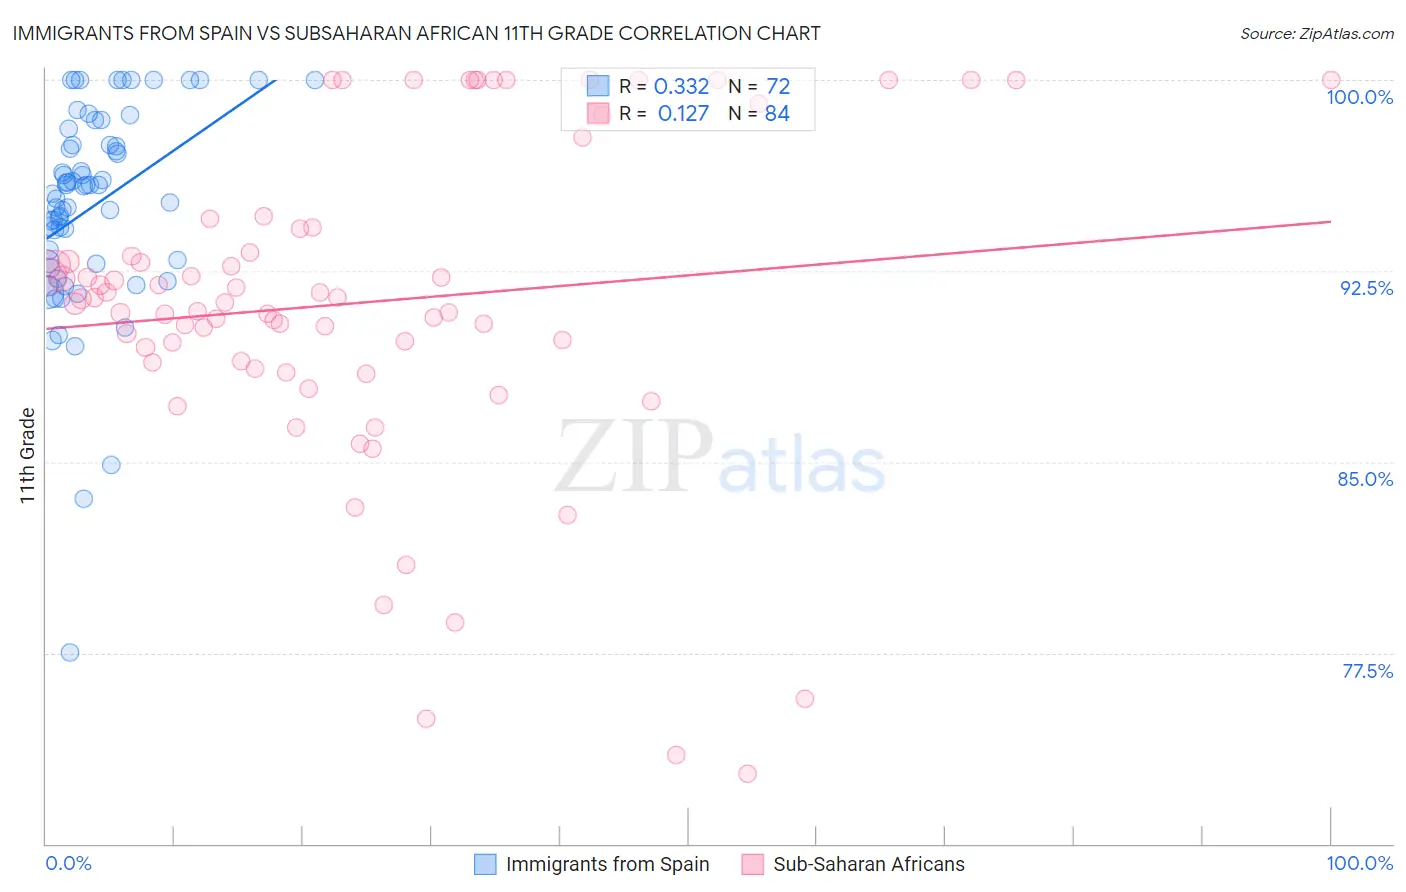 Immigrants from Spain vs Subsaharan African 11th Grade